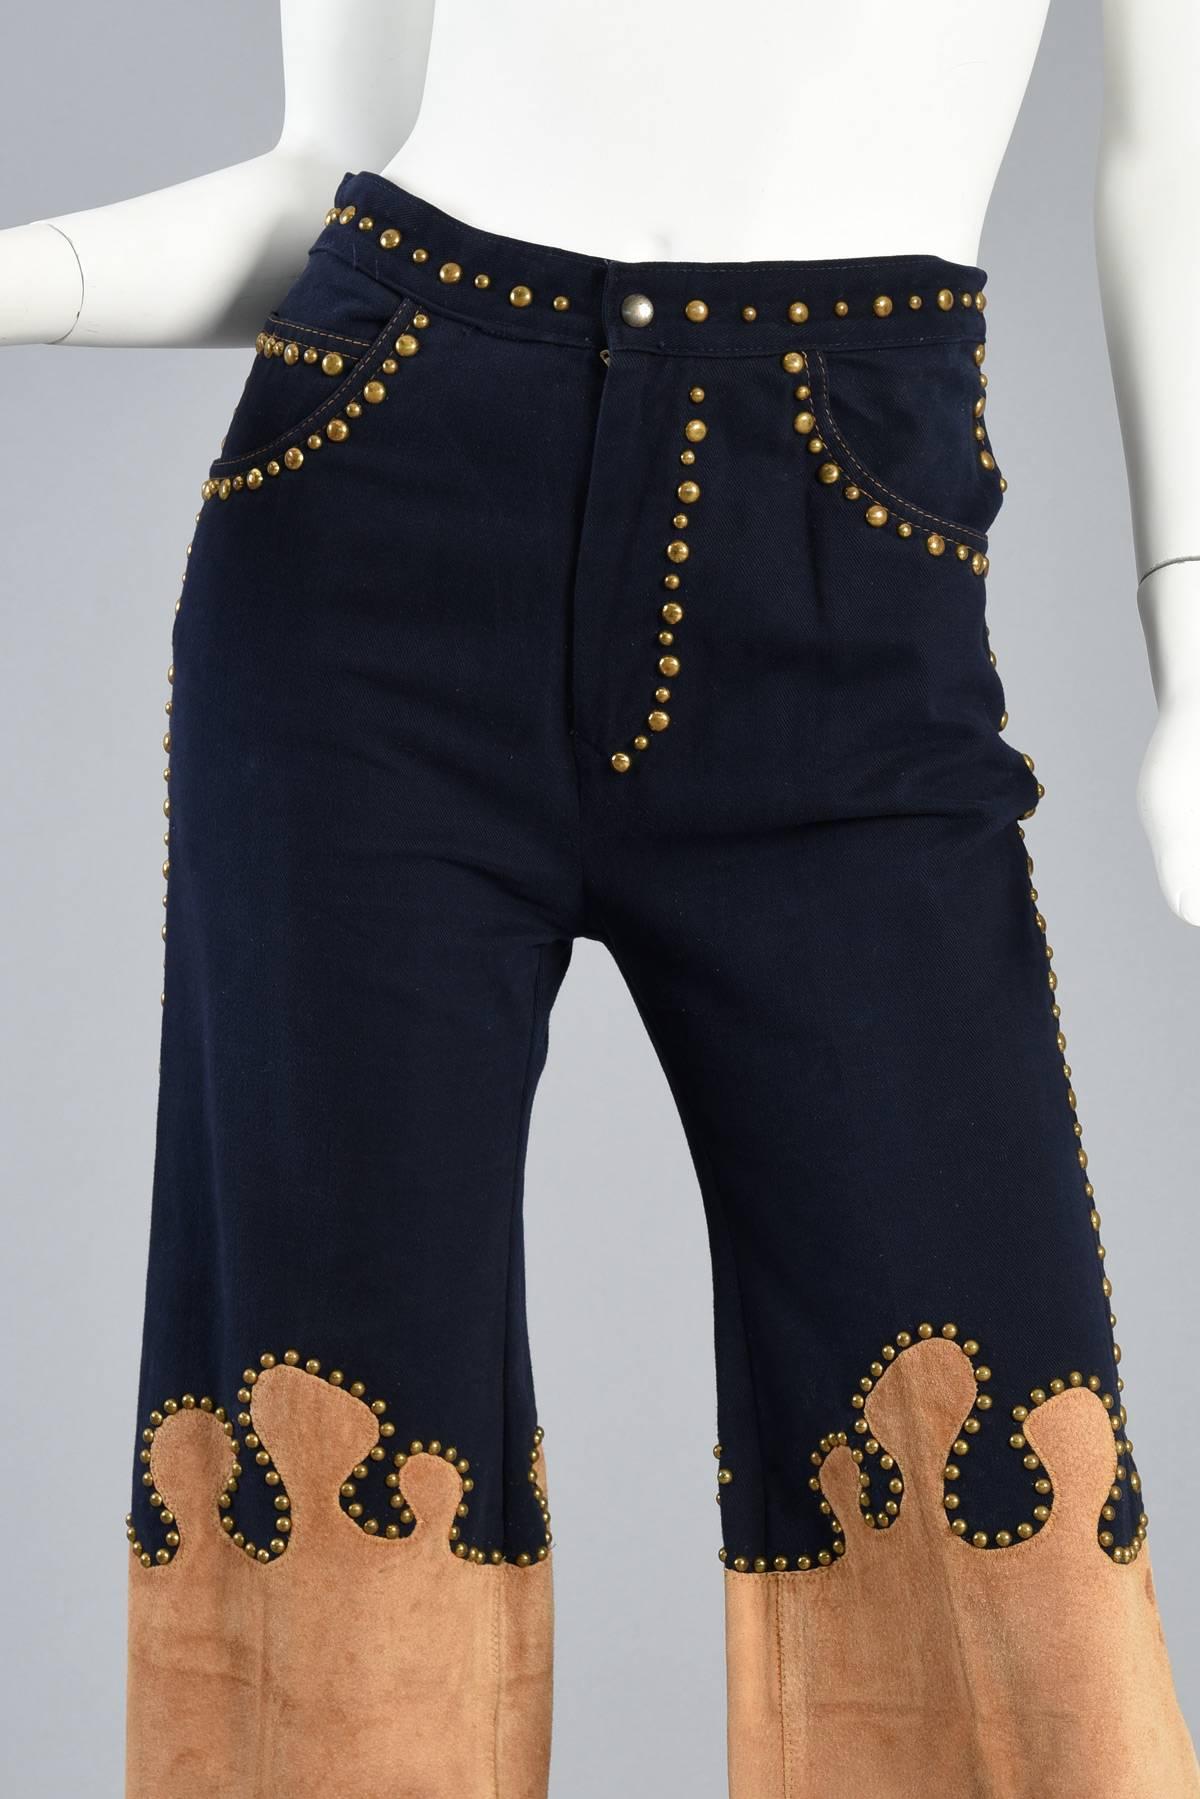 1970s Roncelli Studded Leather + Denim Suit In Excellent Condition For Sale In Yucca Valley, CA